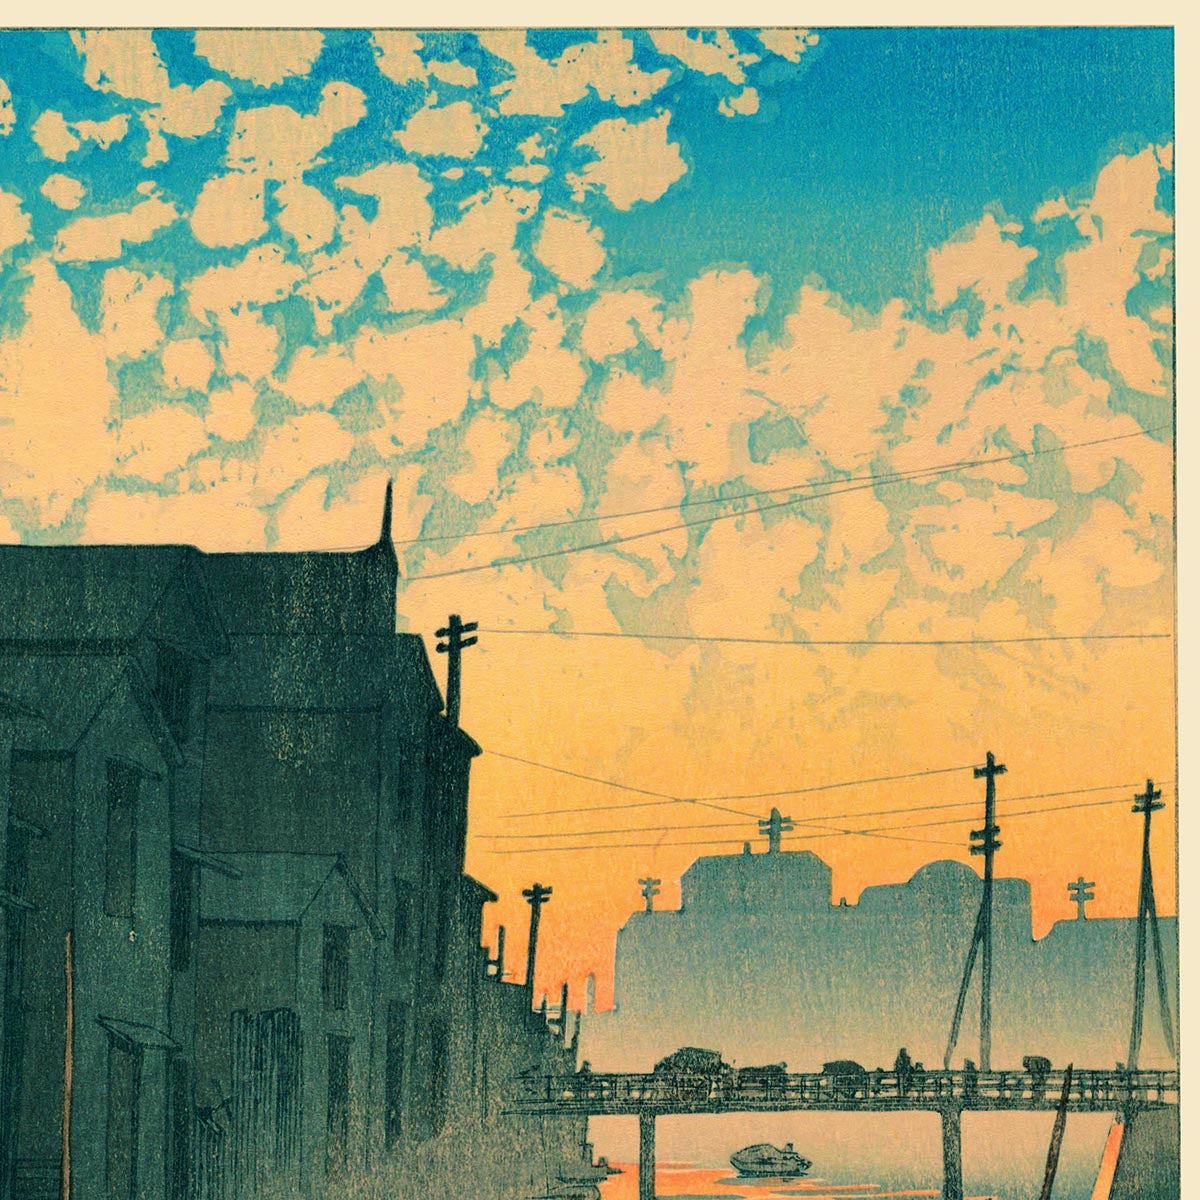 Morning at Onegishi by Hasui